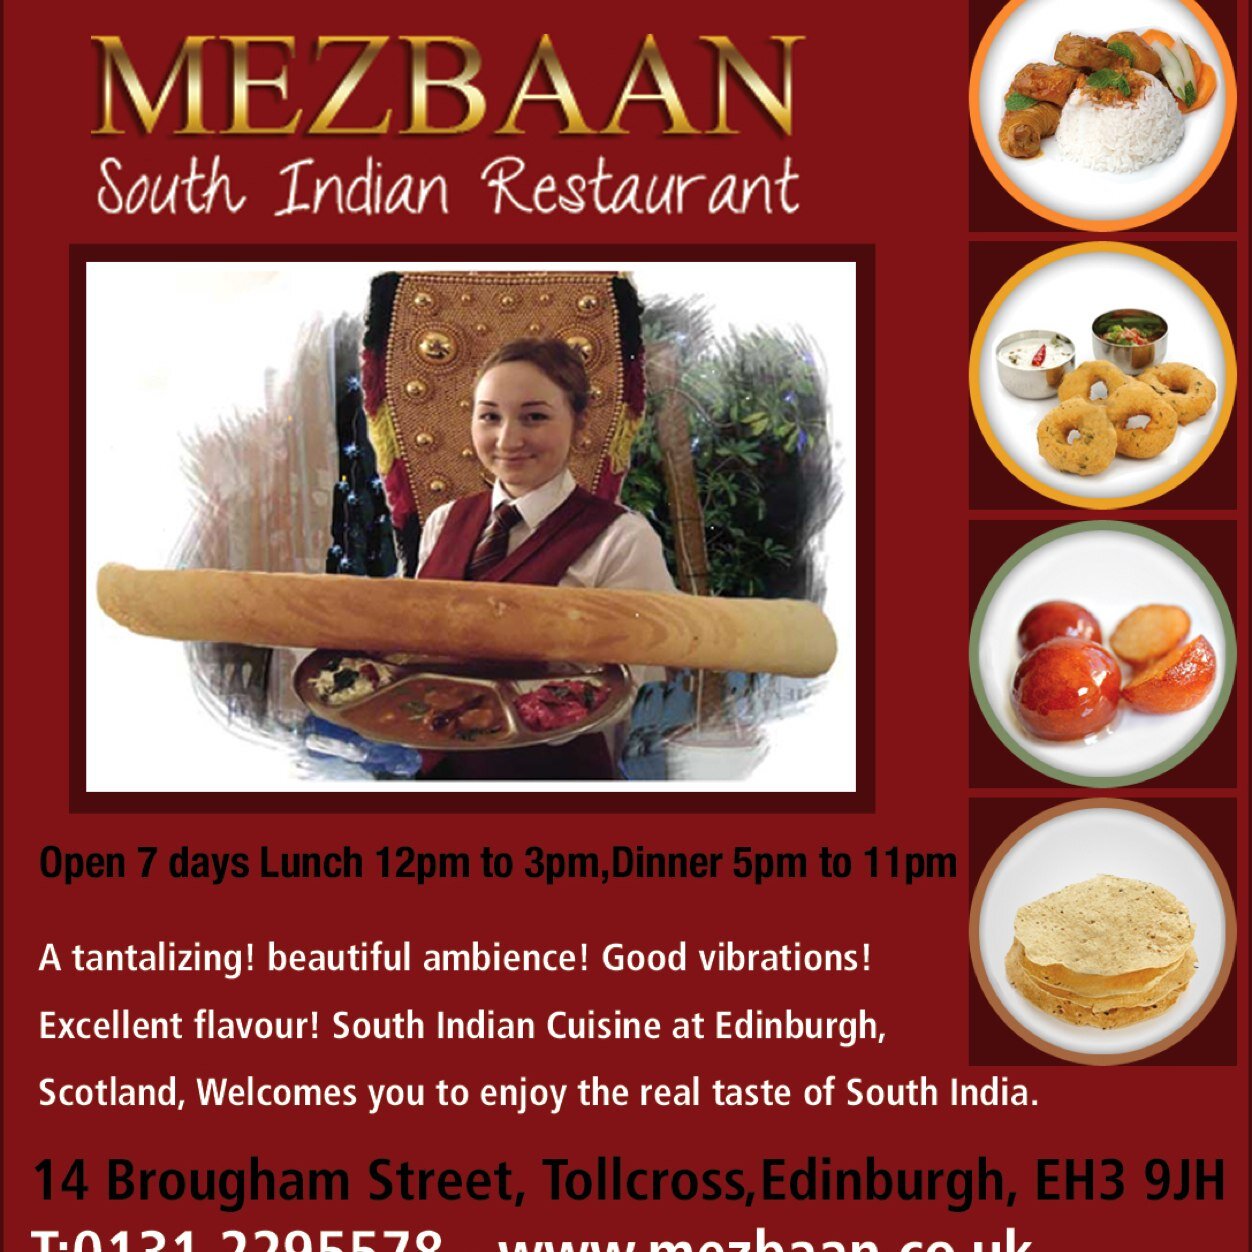 South Indian Restaurant in Edinburgh. Winner of the prestigious South Asian Chef of the Year 2010 Award.Follow us for news, reviews and latest offers.